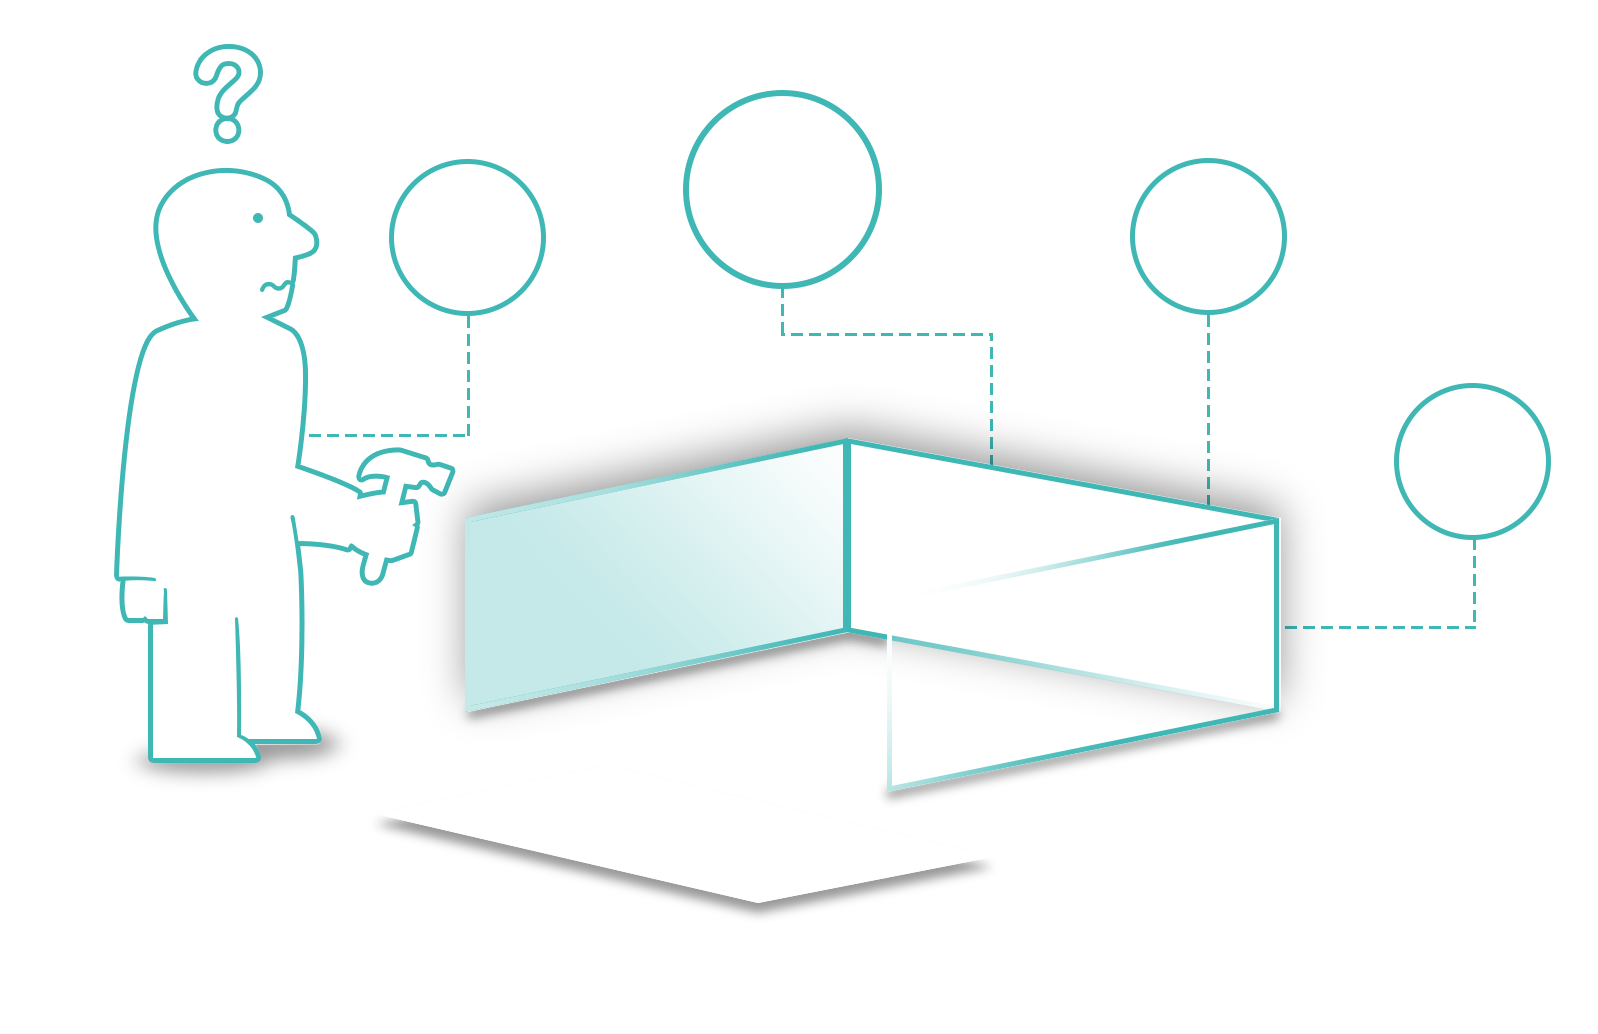 Instructional diagram of a confused person building a booth, with icons indicating needs for a monitor, tape, electric, and tacos.